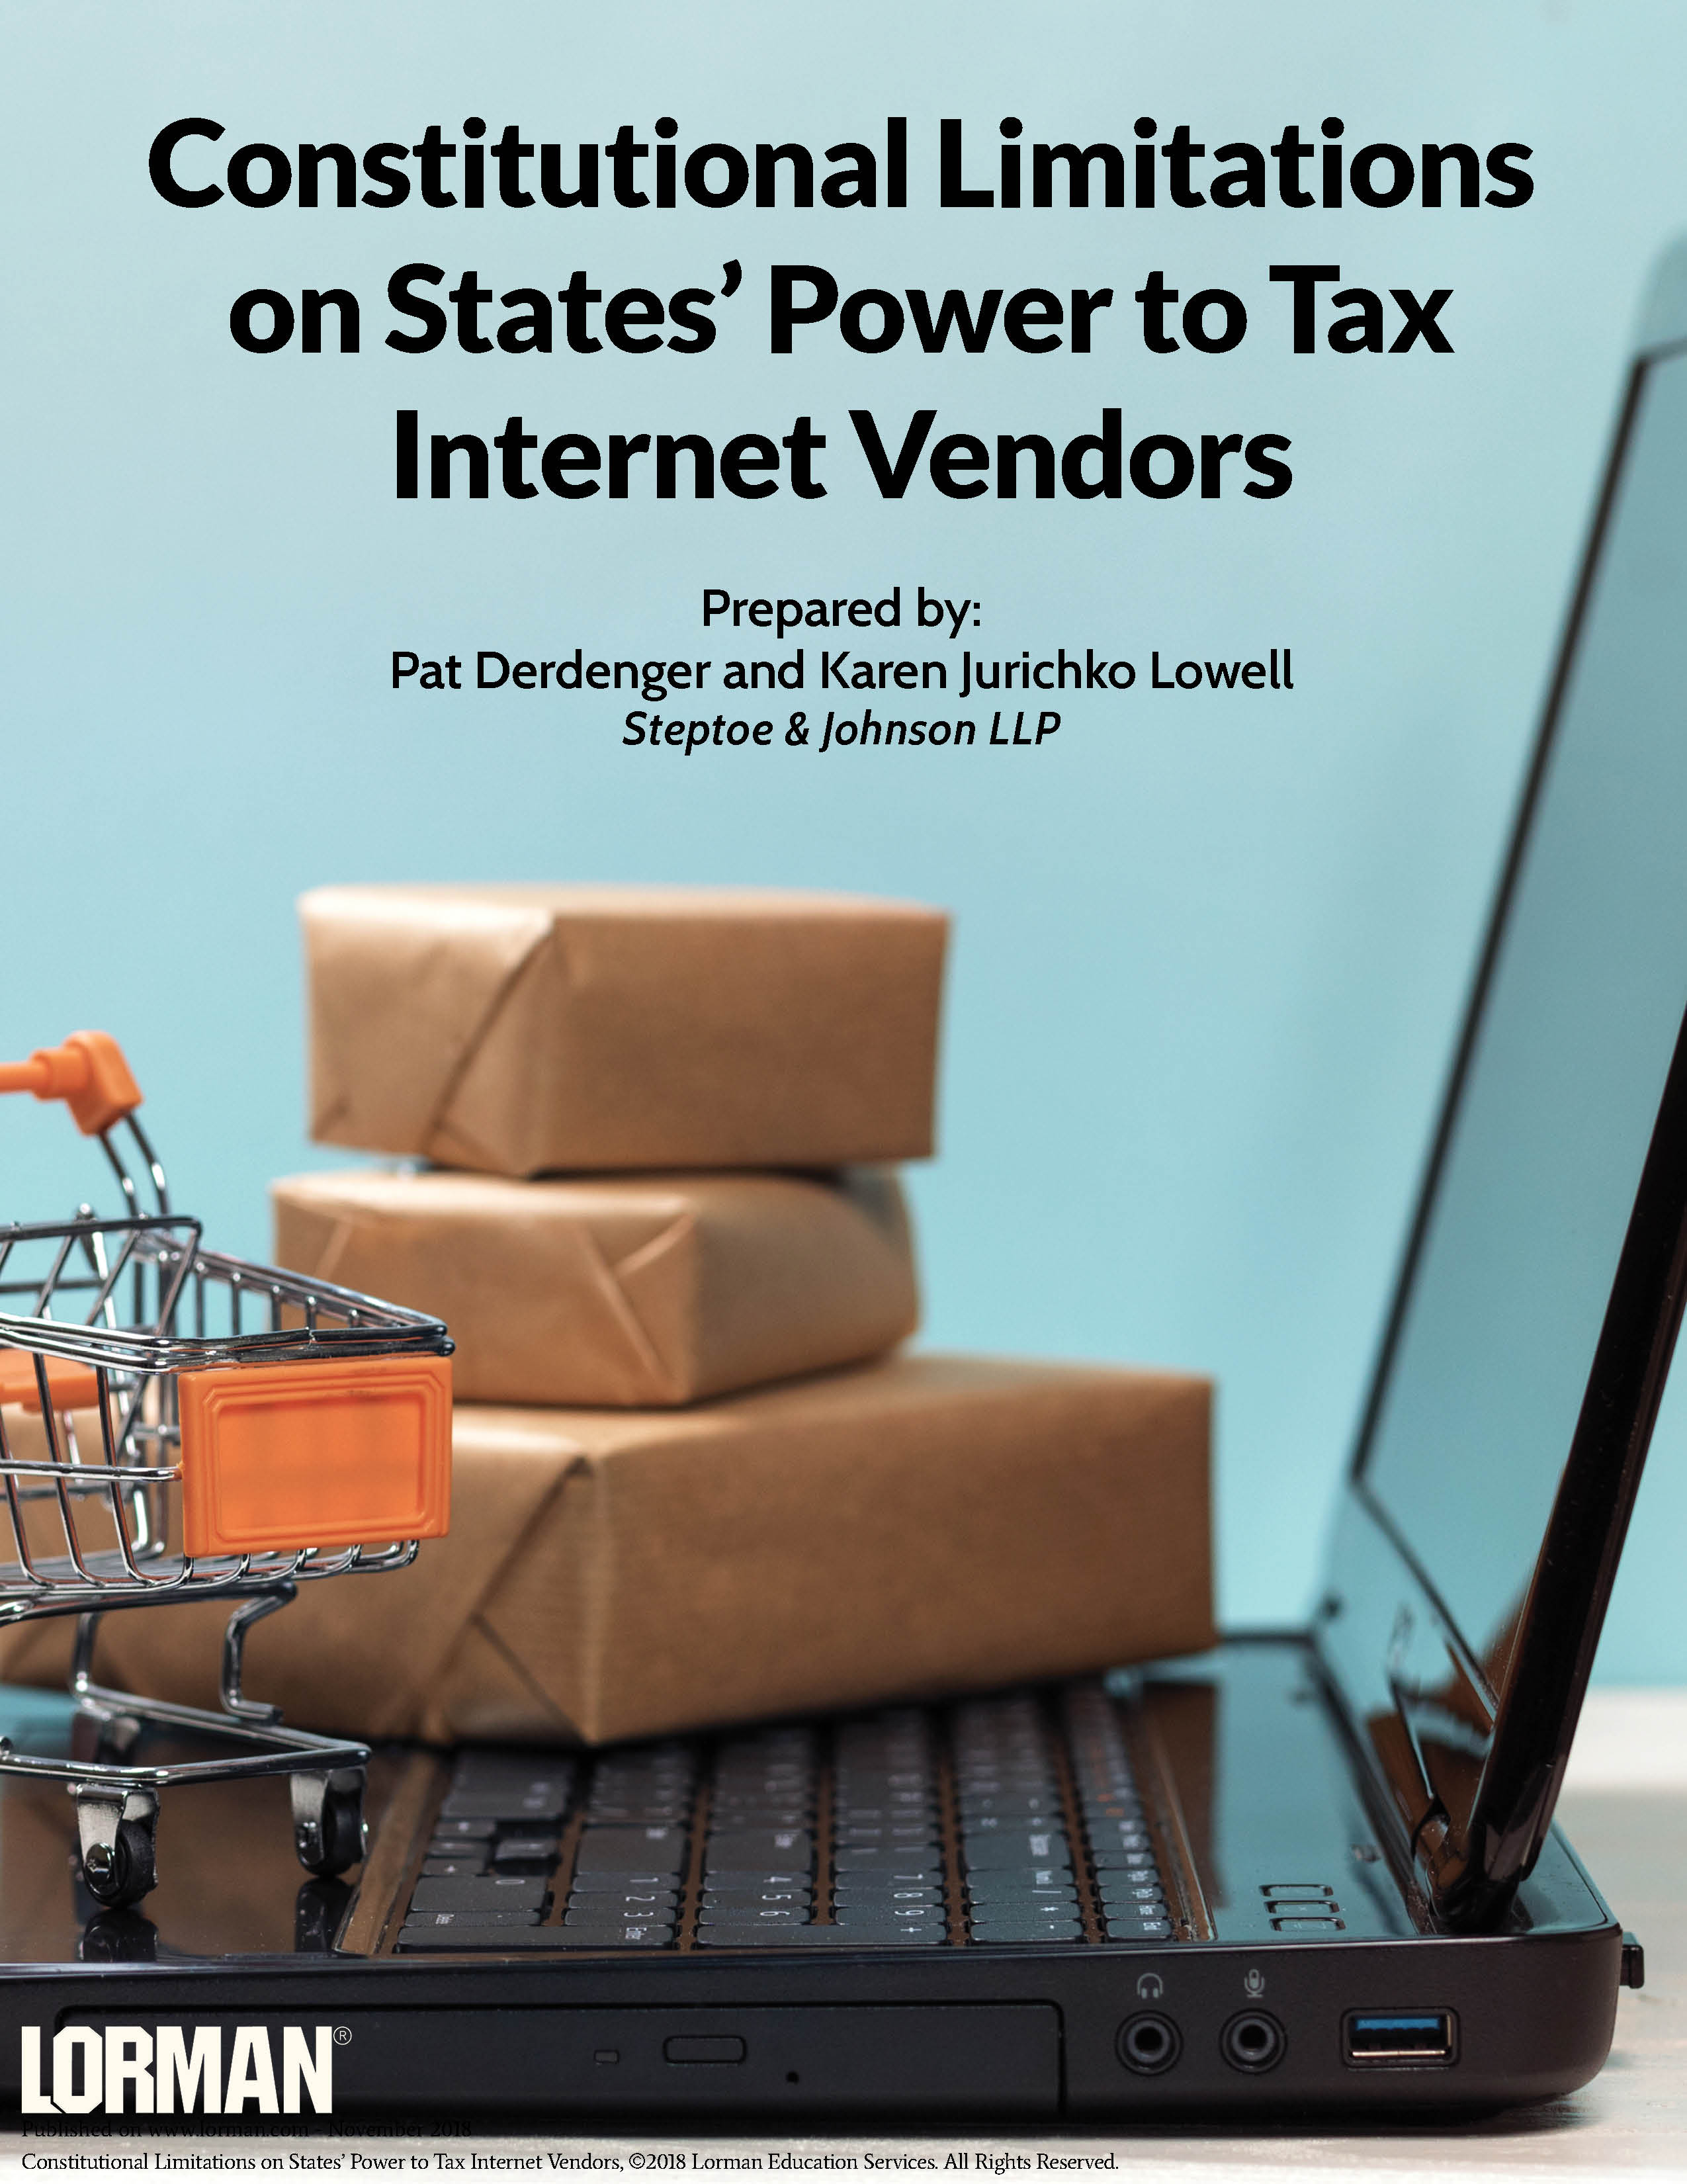 Constitutional Limitations on States’ Power to Tax Internet Vendors